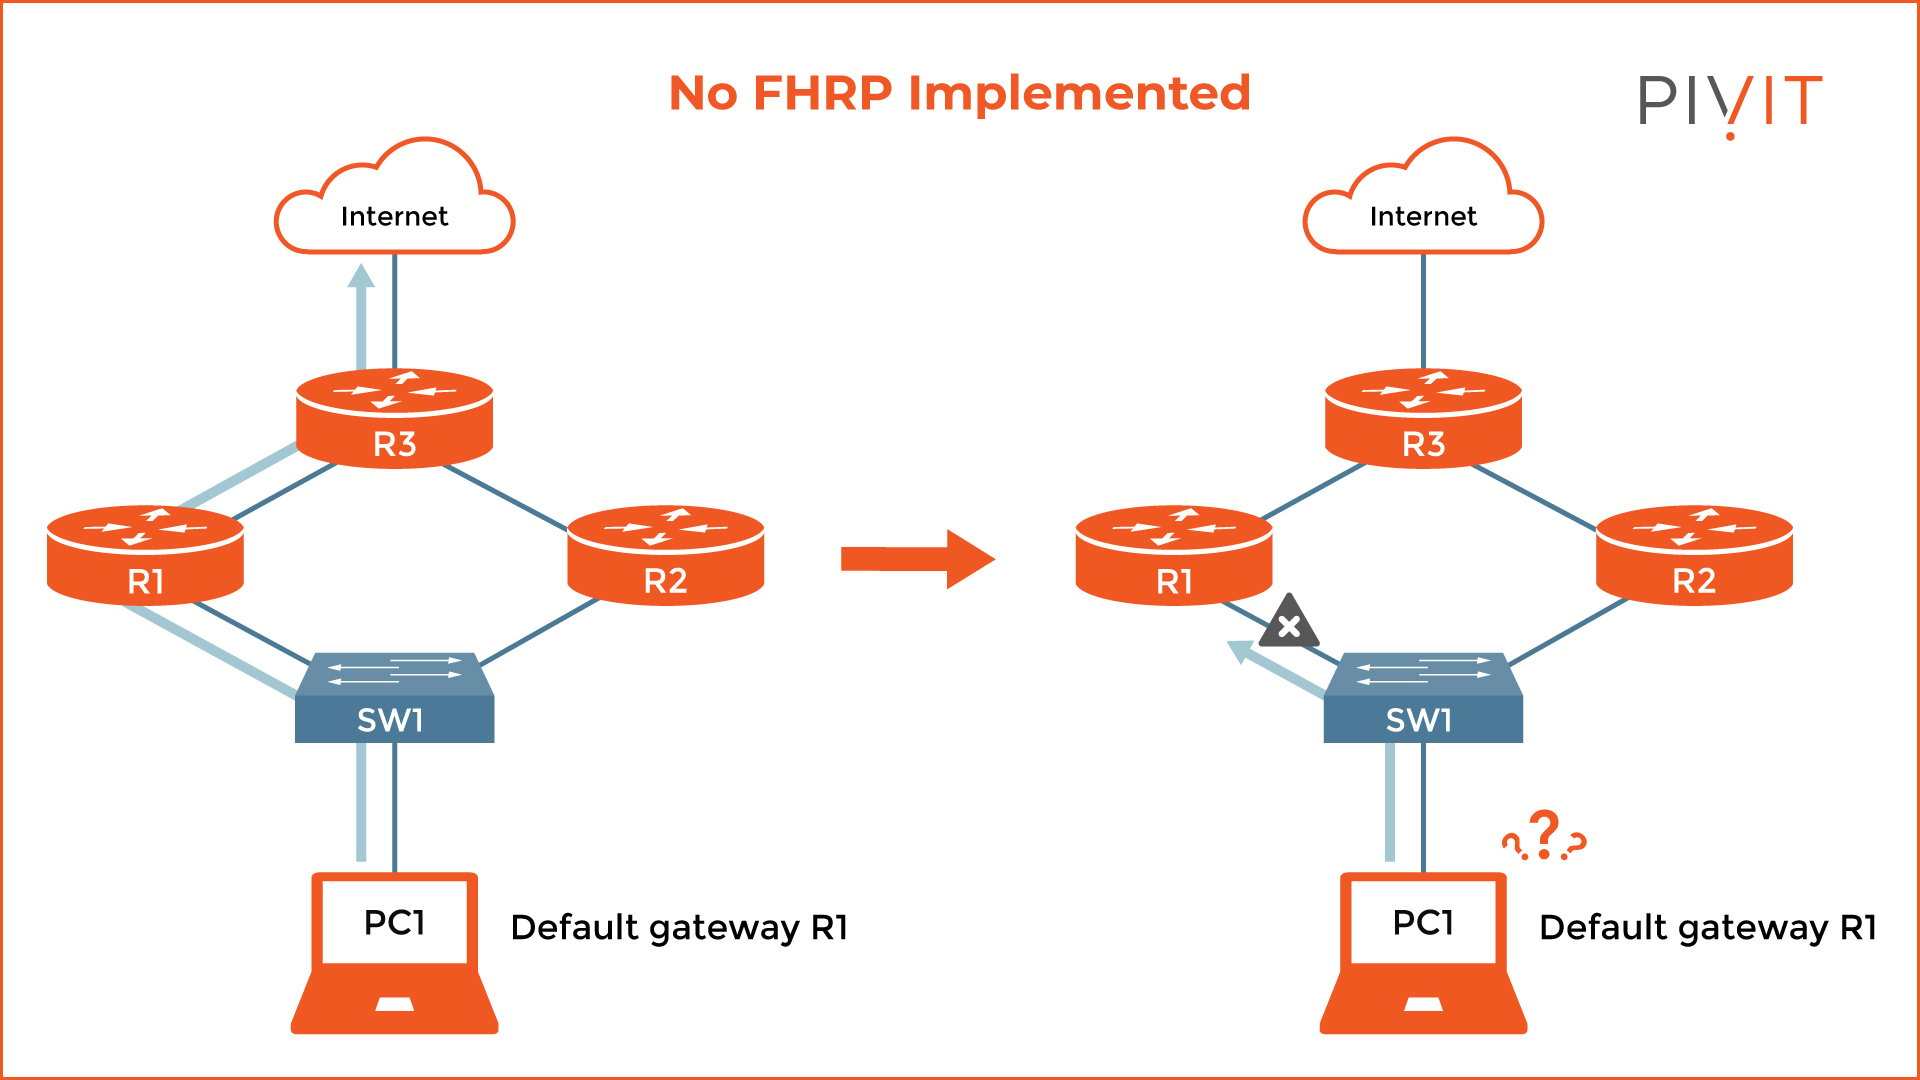 Example network topology when FHRP has not been implemented